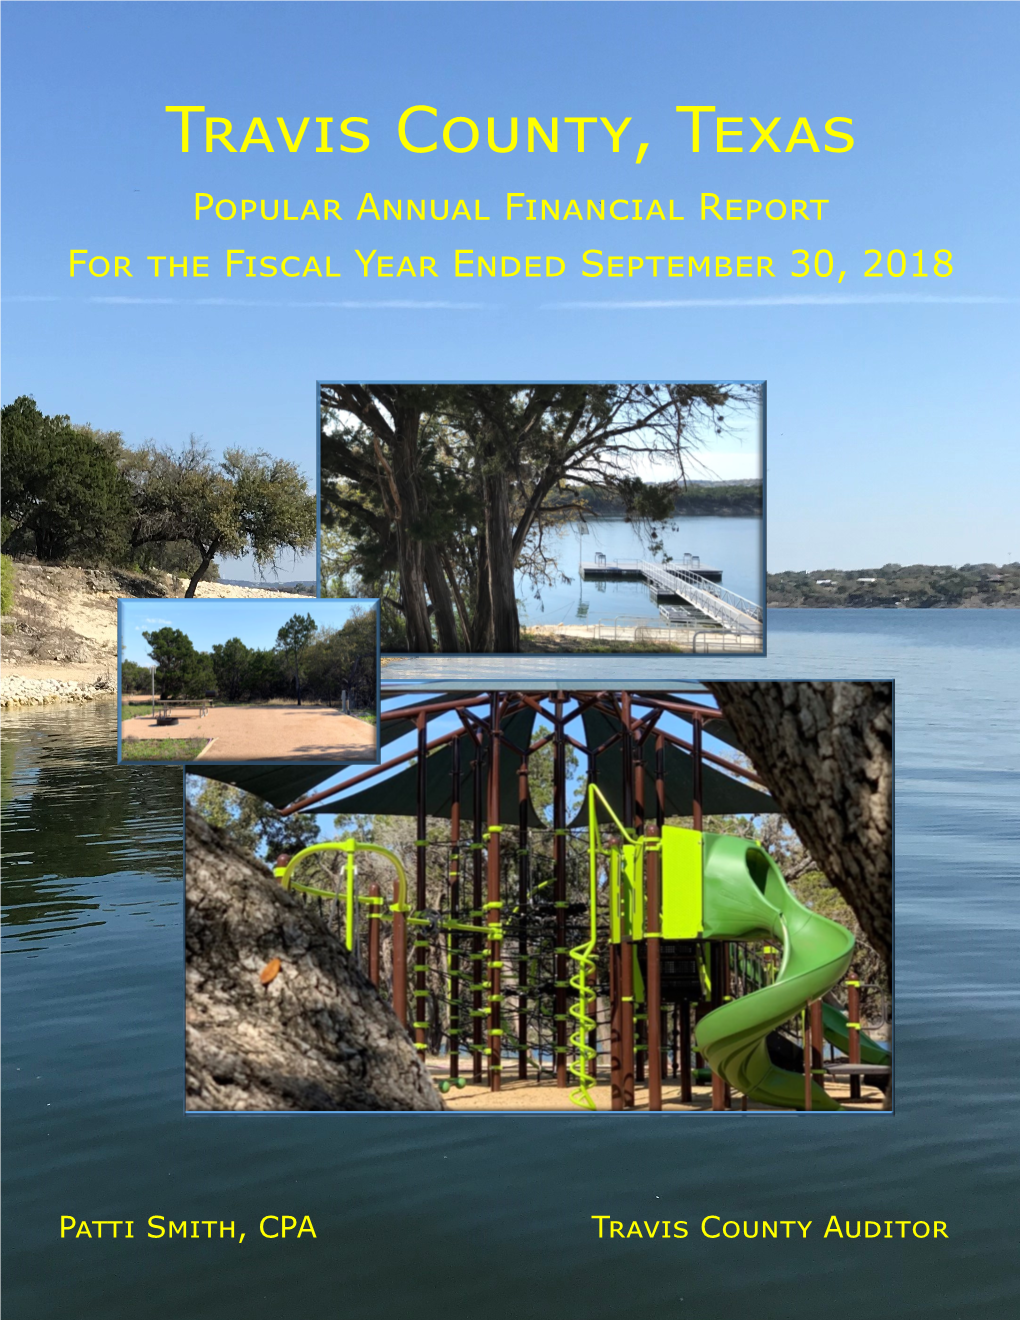 Travis County, Texas Popular Annual Financial Report for the Fiscal Year Ended September 30, 2018